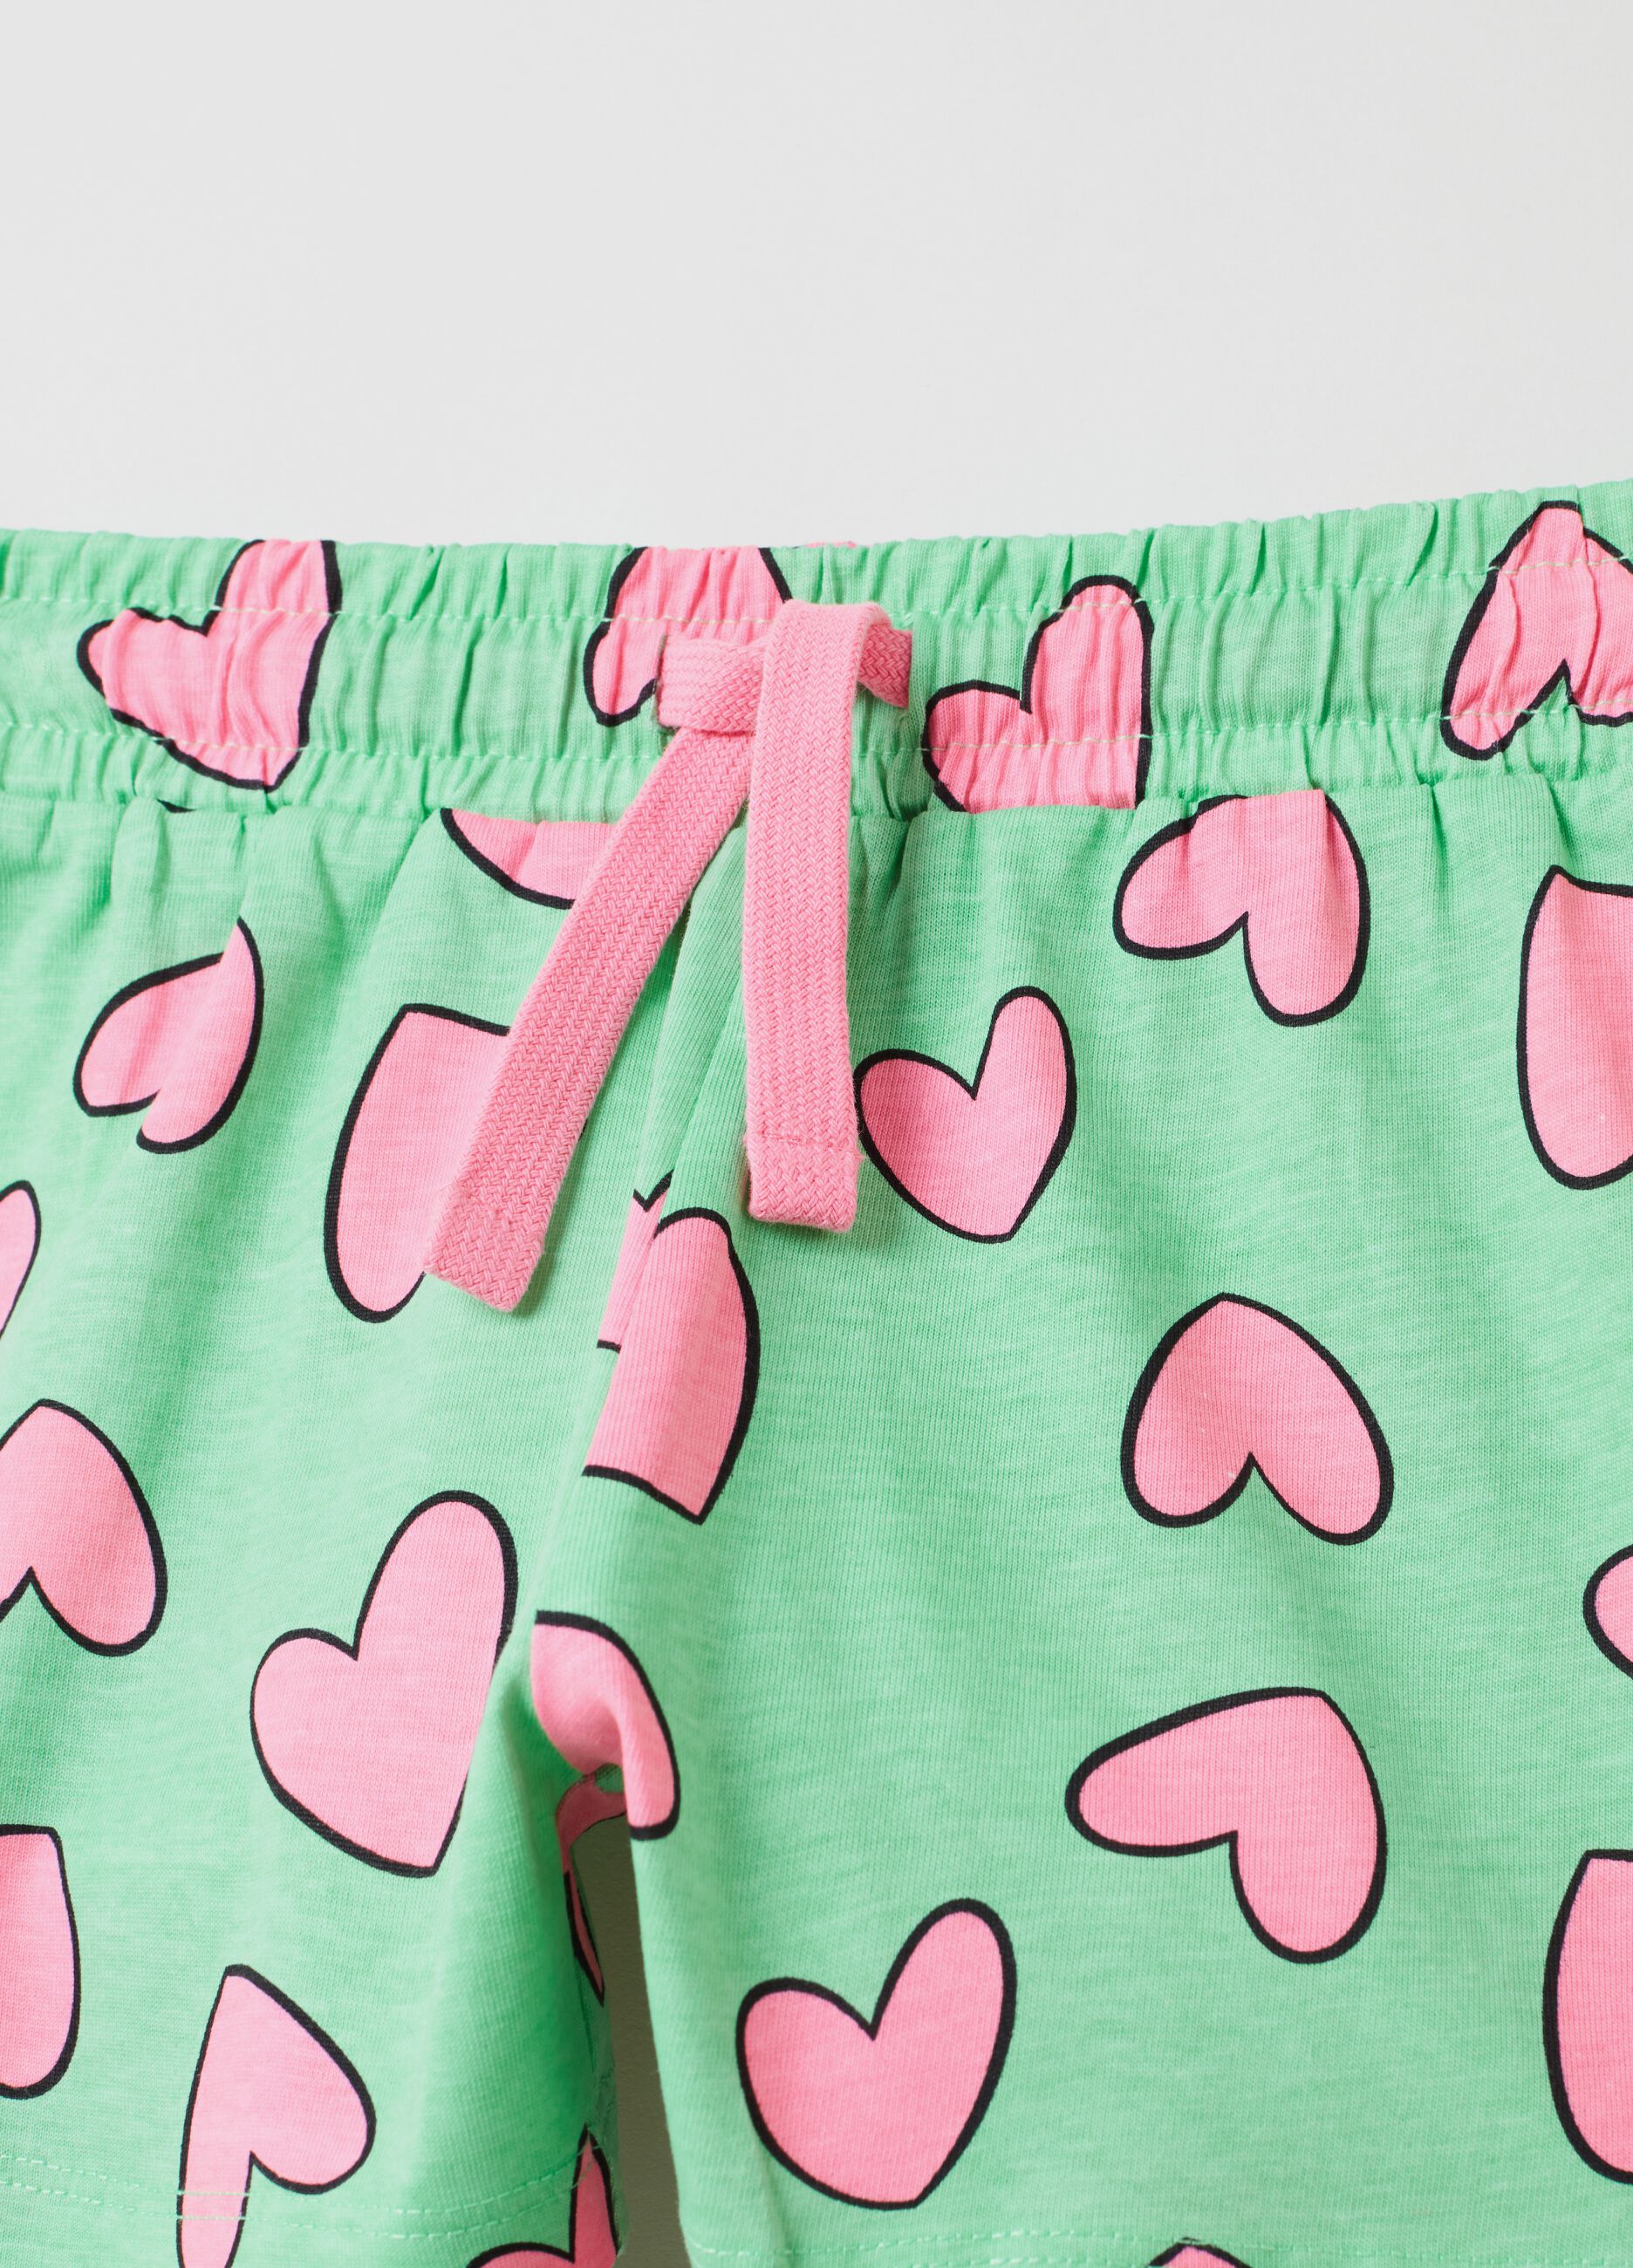 Two-pack cotton shorts with drawstring